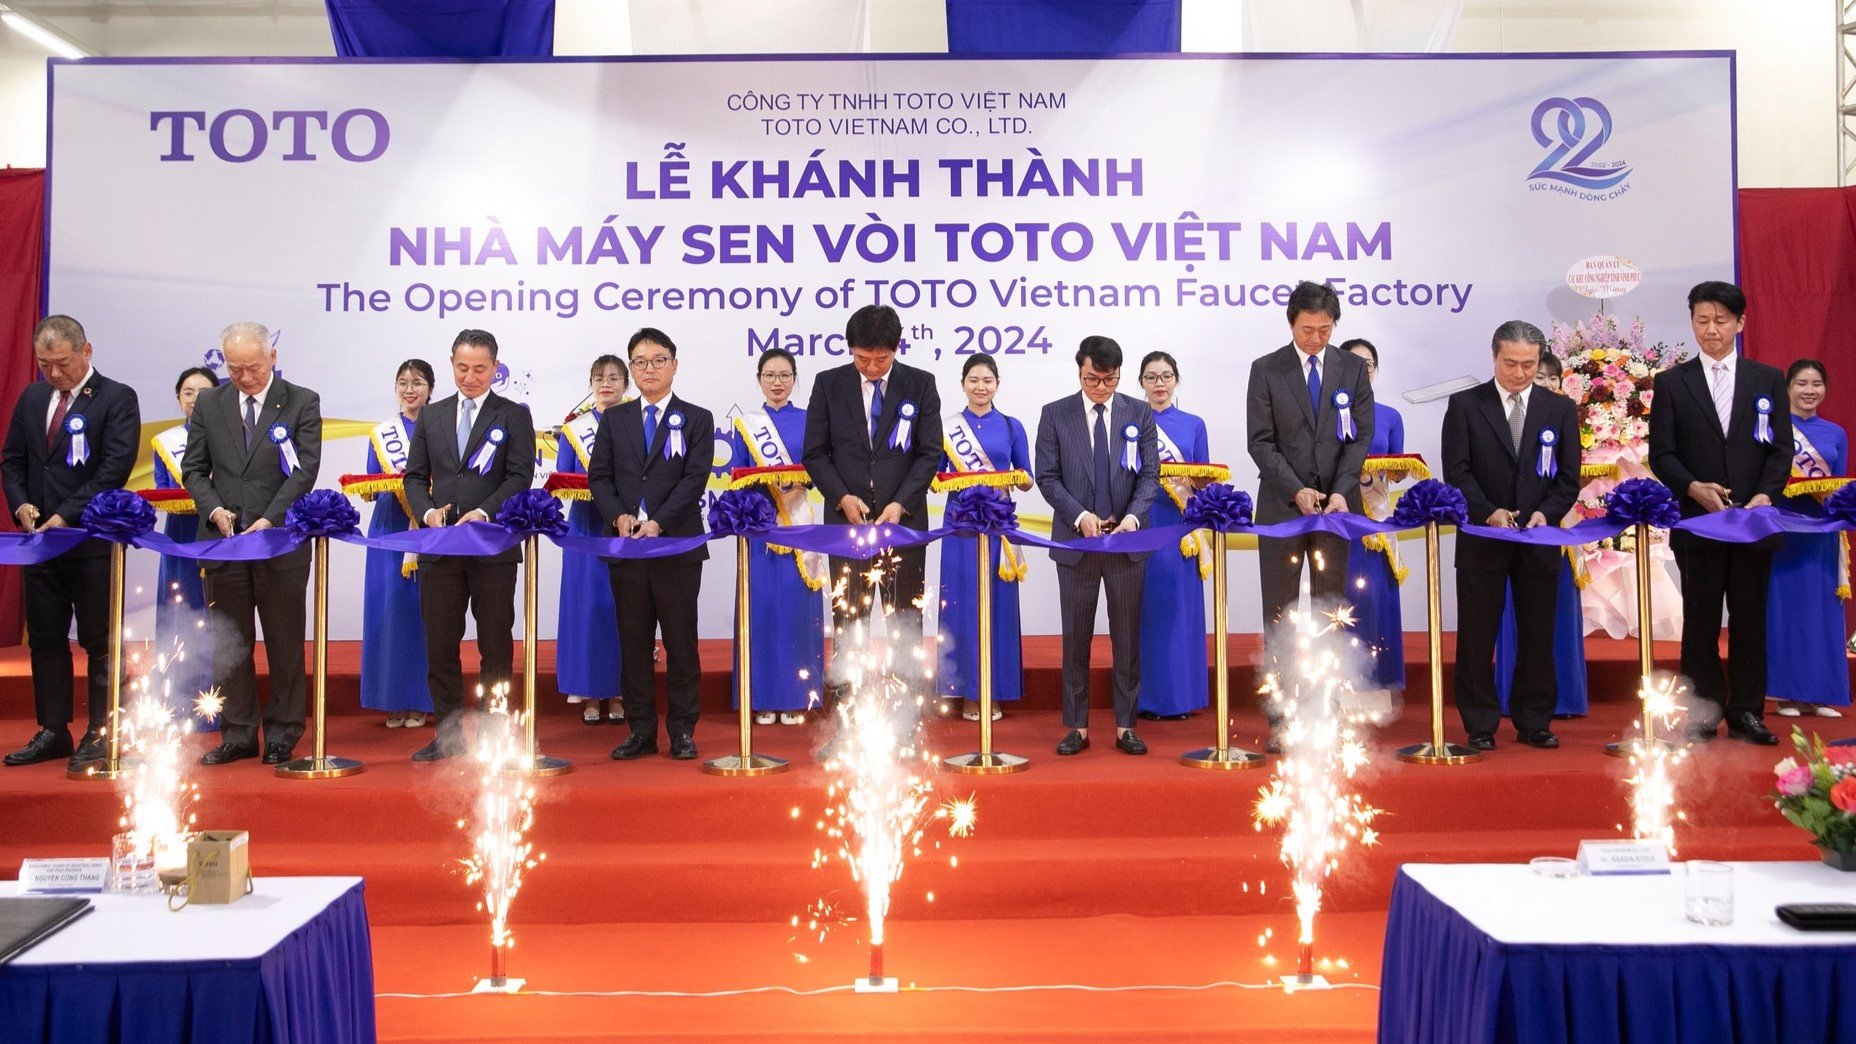 TOTO Vietnam holds an opening ceremony for its faucet factory in Vinh Phuc province, northern Vietnam, March 4, 2024. Photo courtesy of the company.